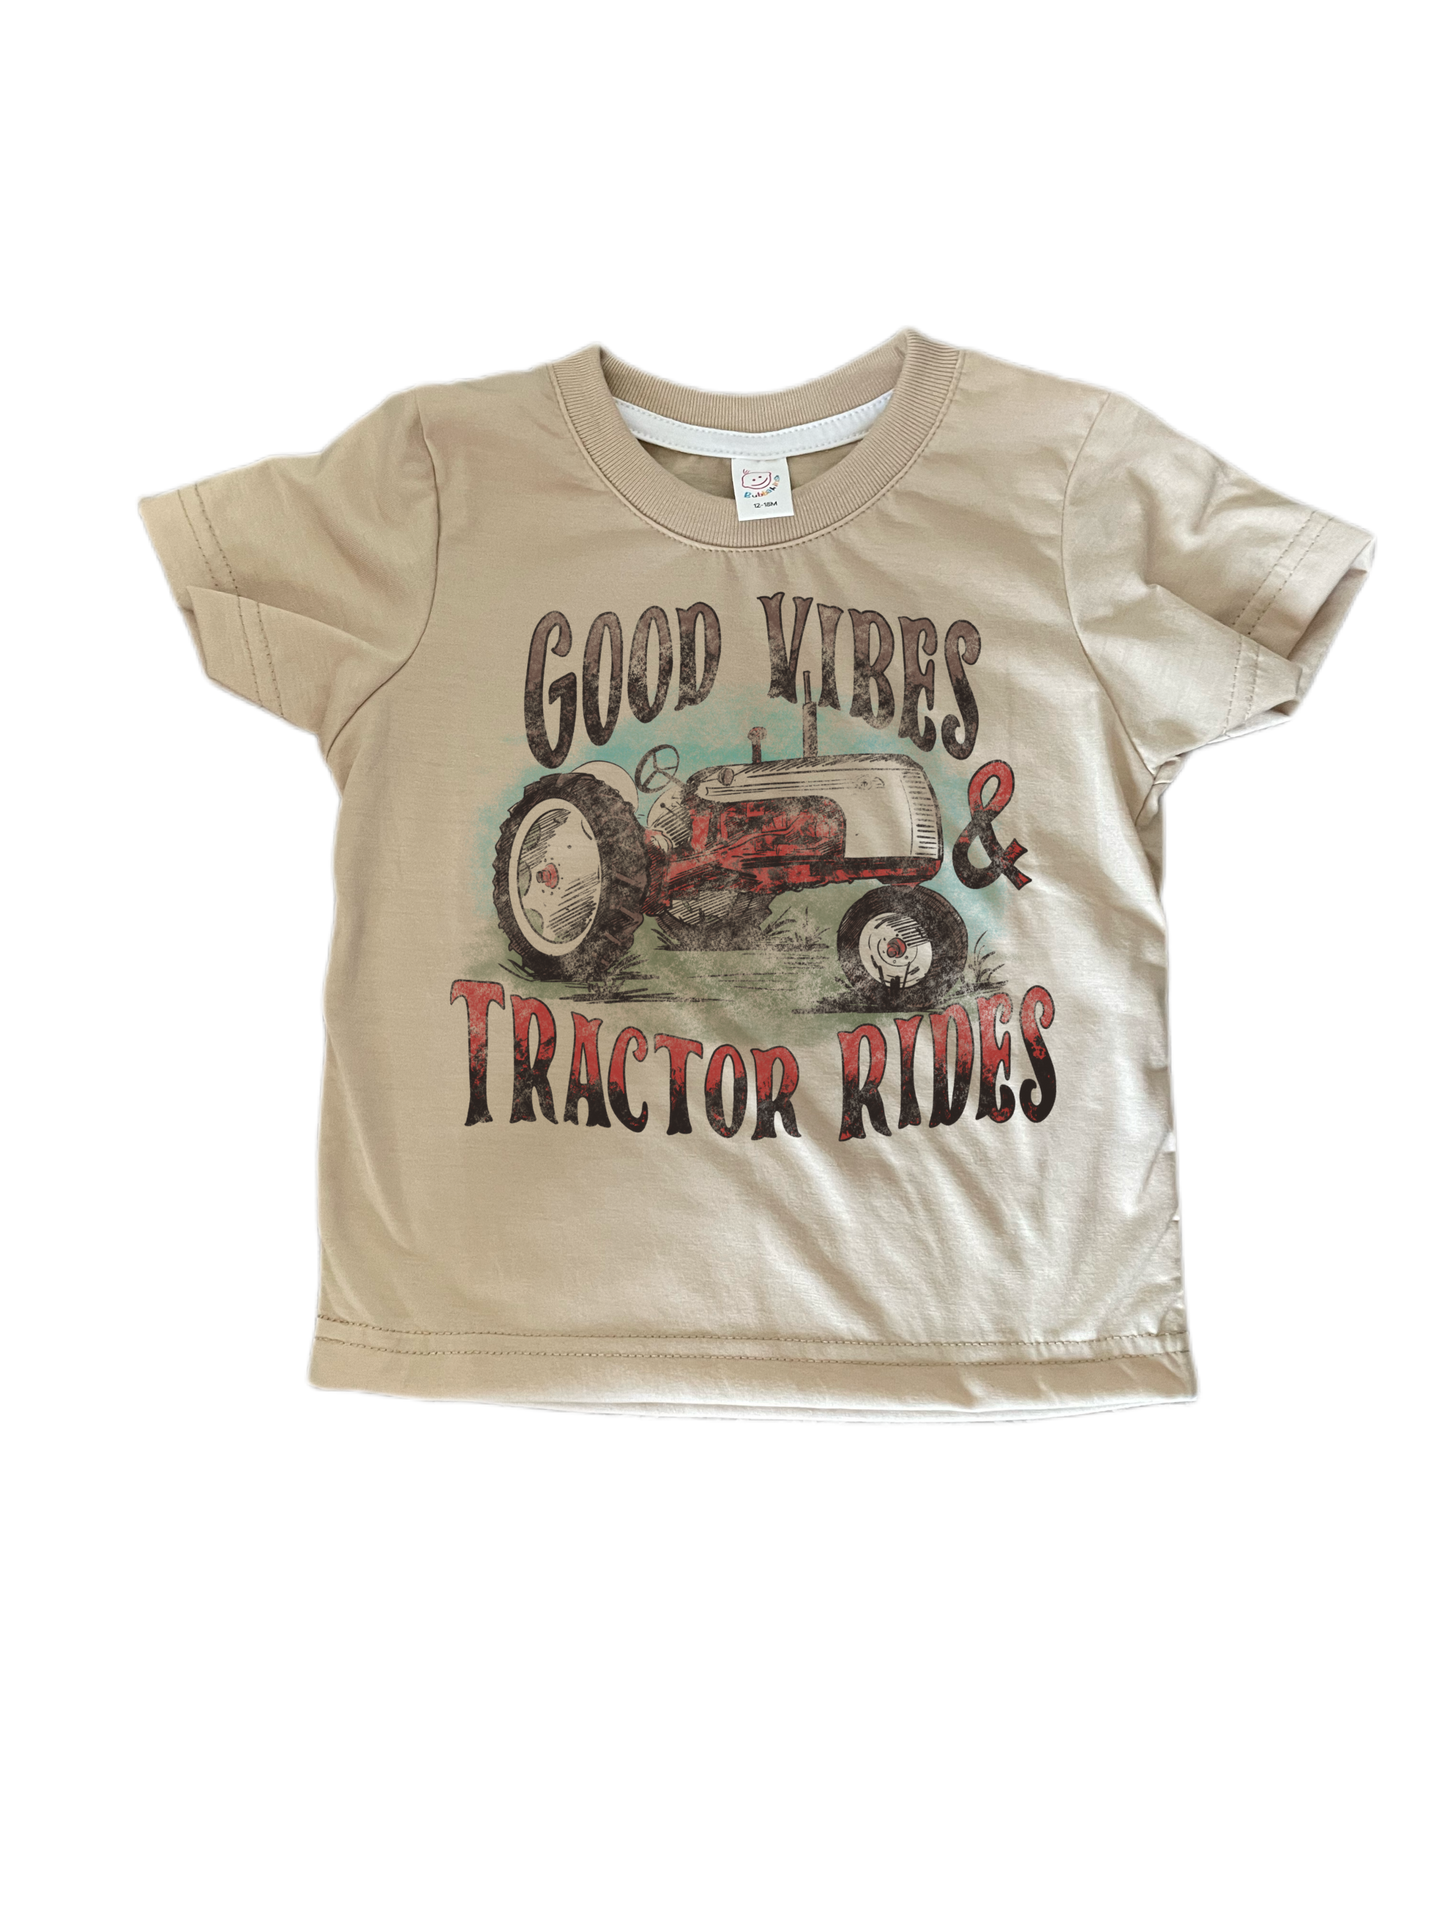 Good vibes tractor rides